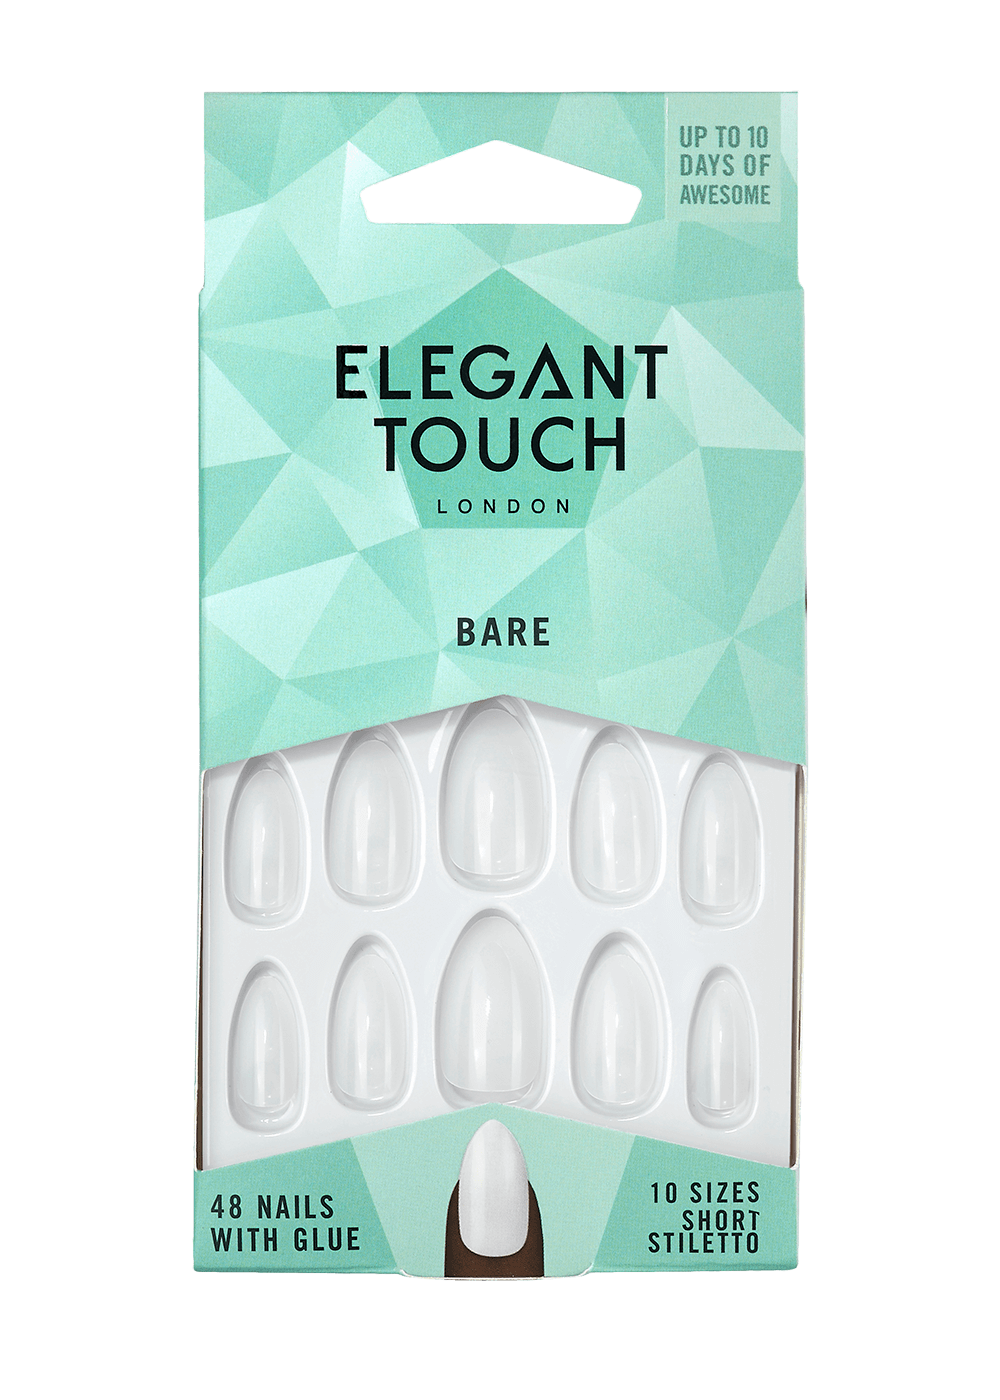 Elegant Touch Totally Bare Nails